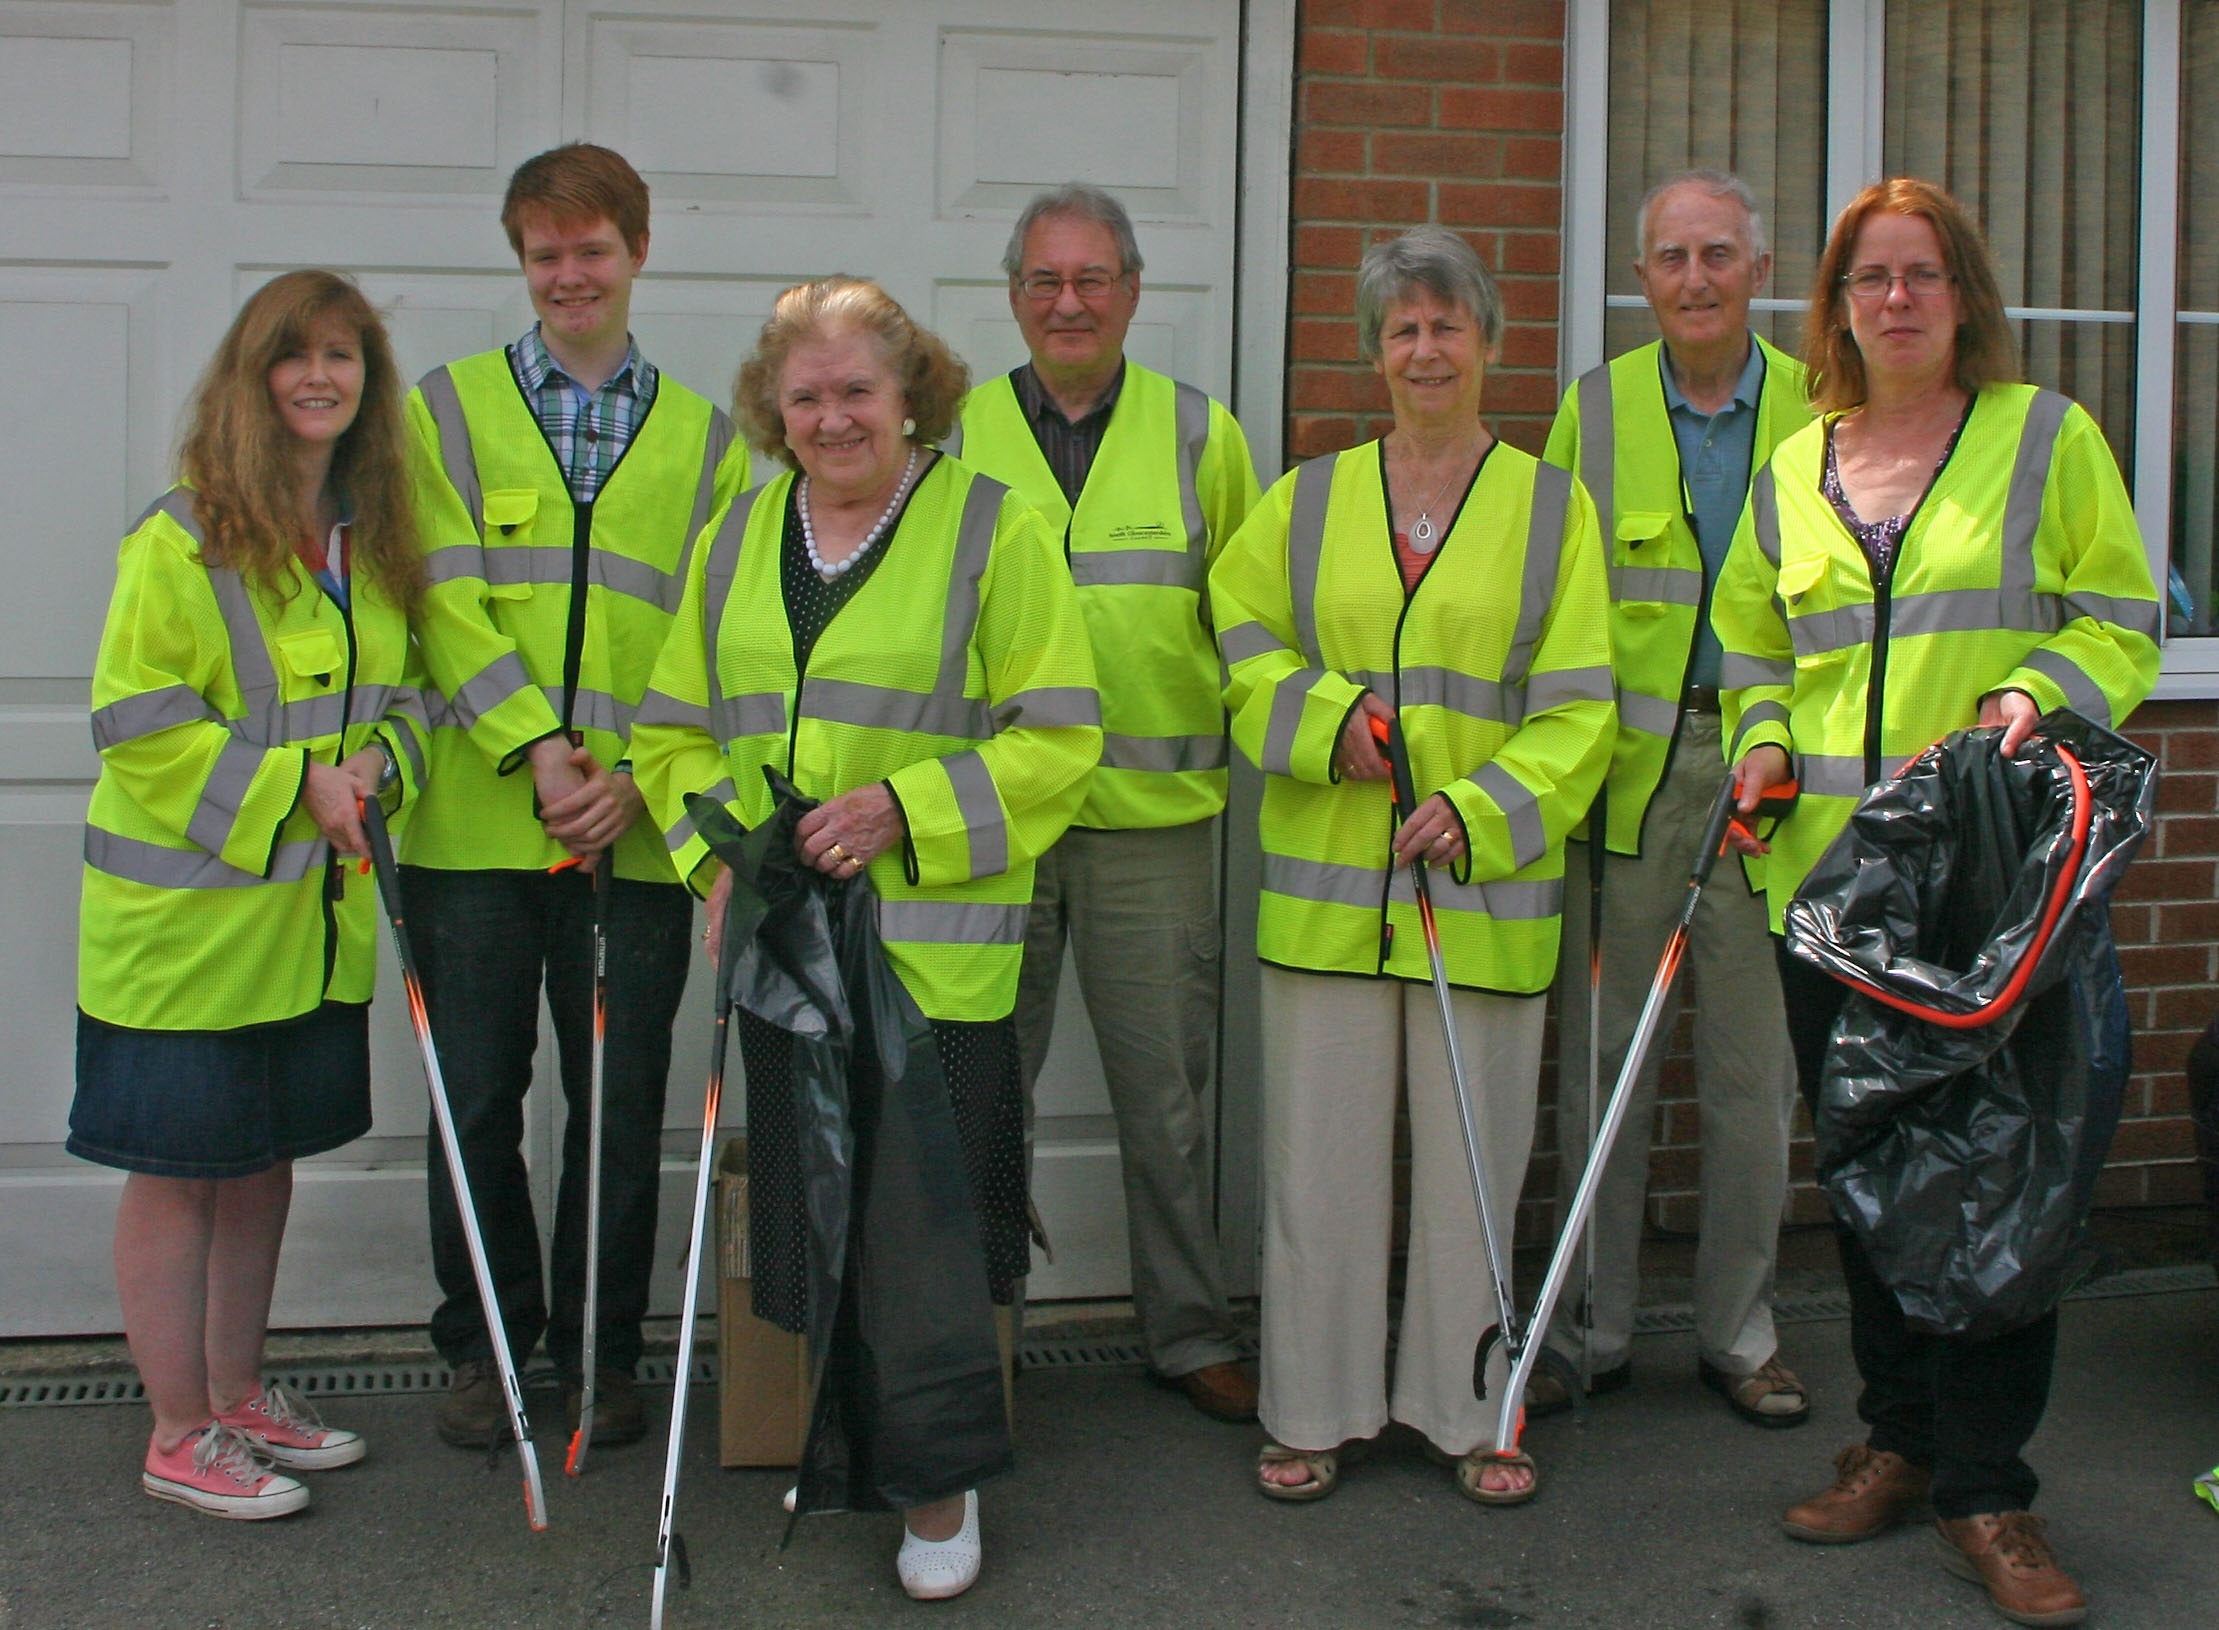 Picture of 7 of the Litter Buster Volunteers